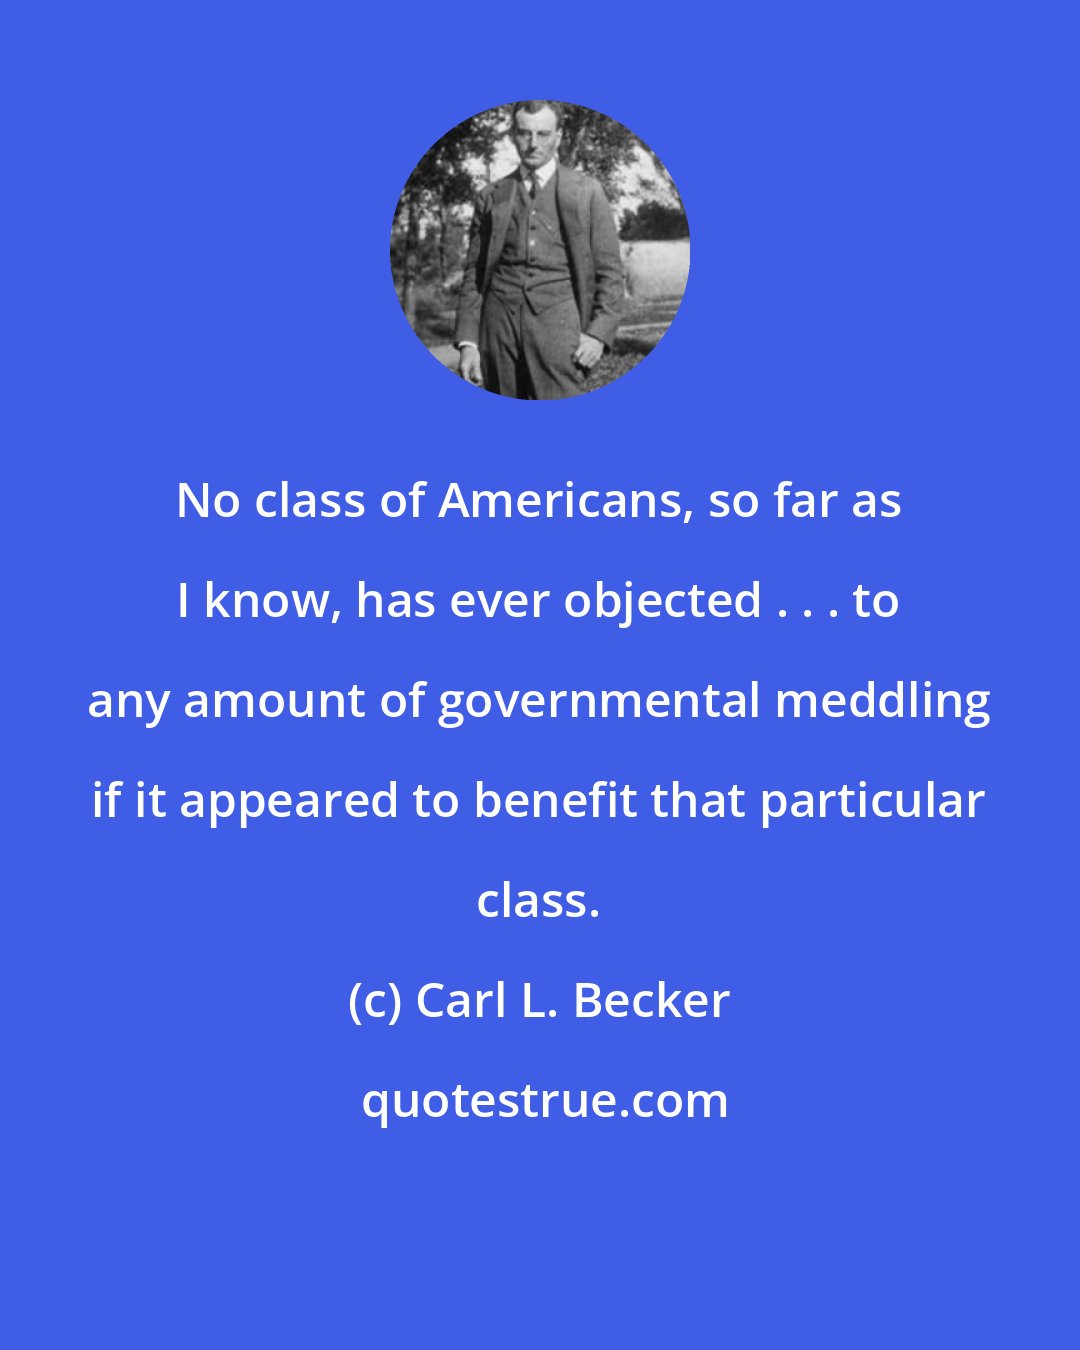 Carl L. Becker: No class of Americans, so far as I know, has ever objected . . . to any amount of governmental meddling if it appeared to benefit that particular class.